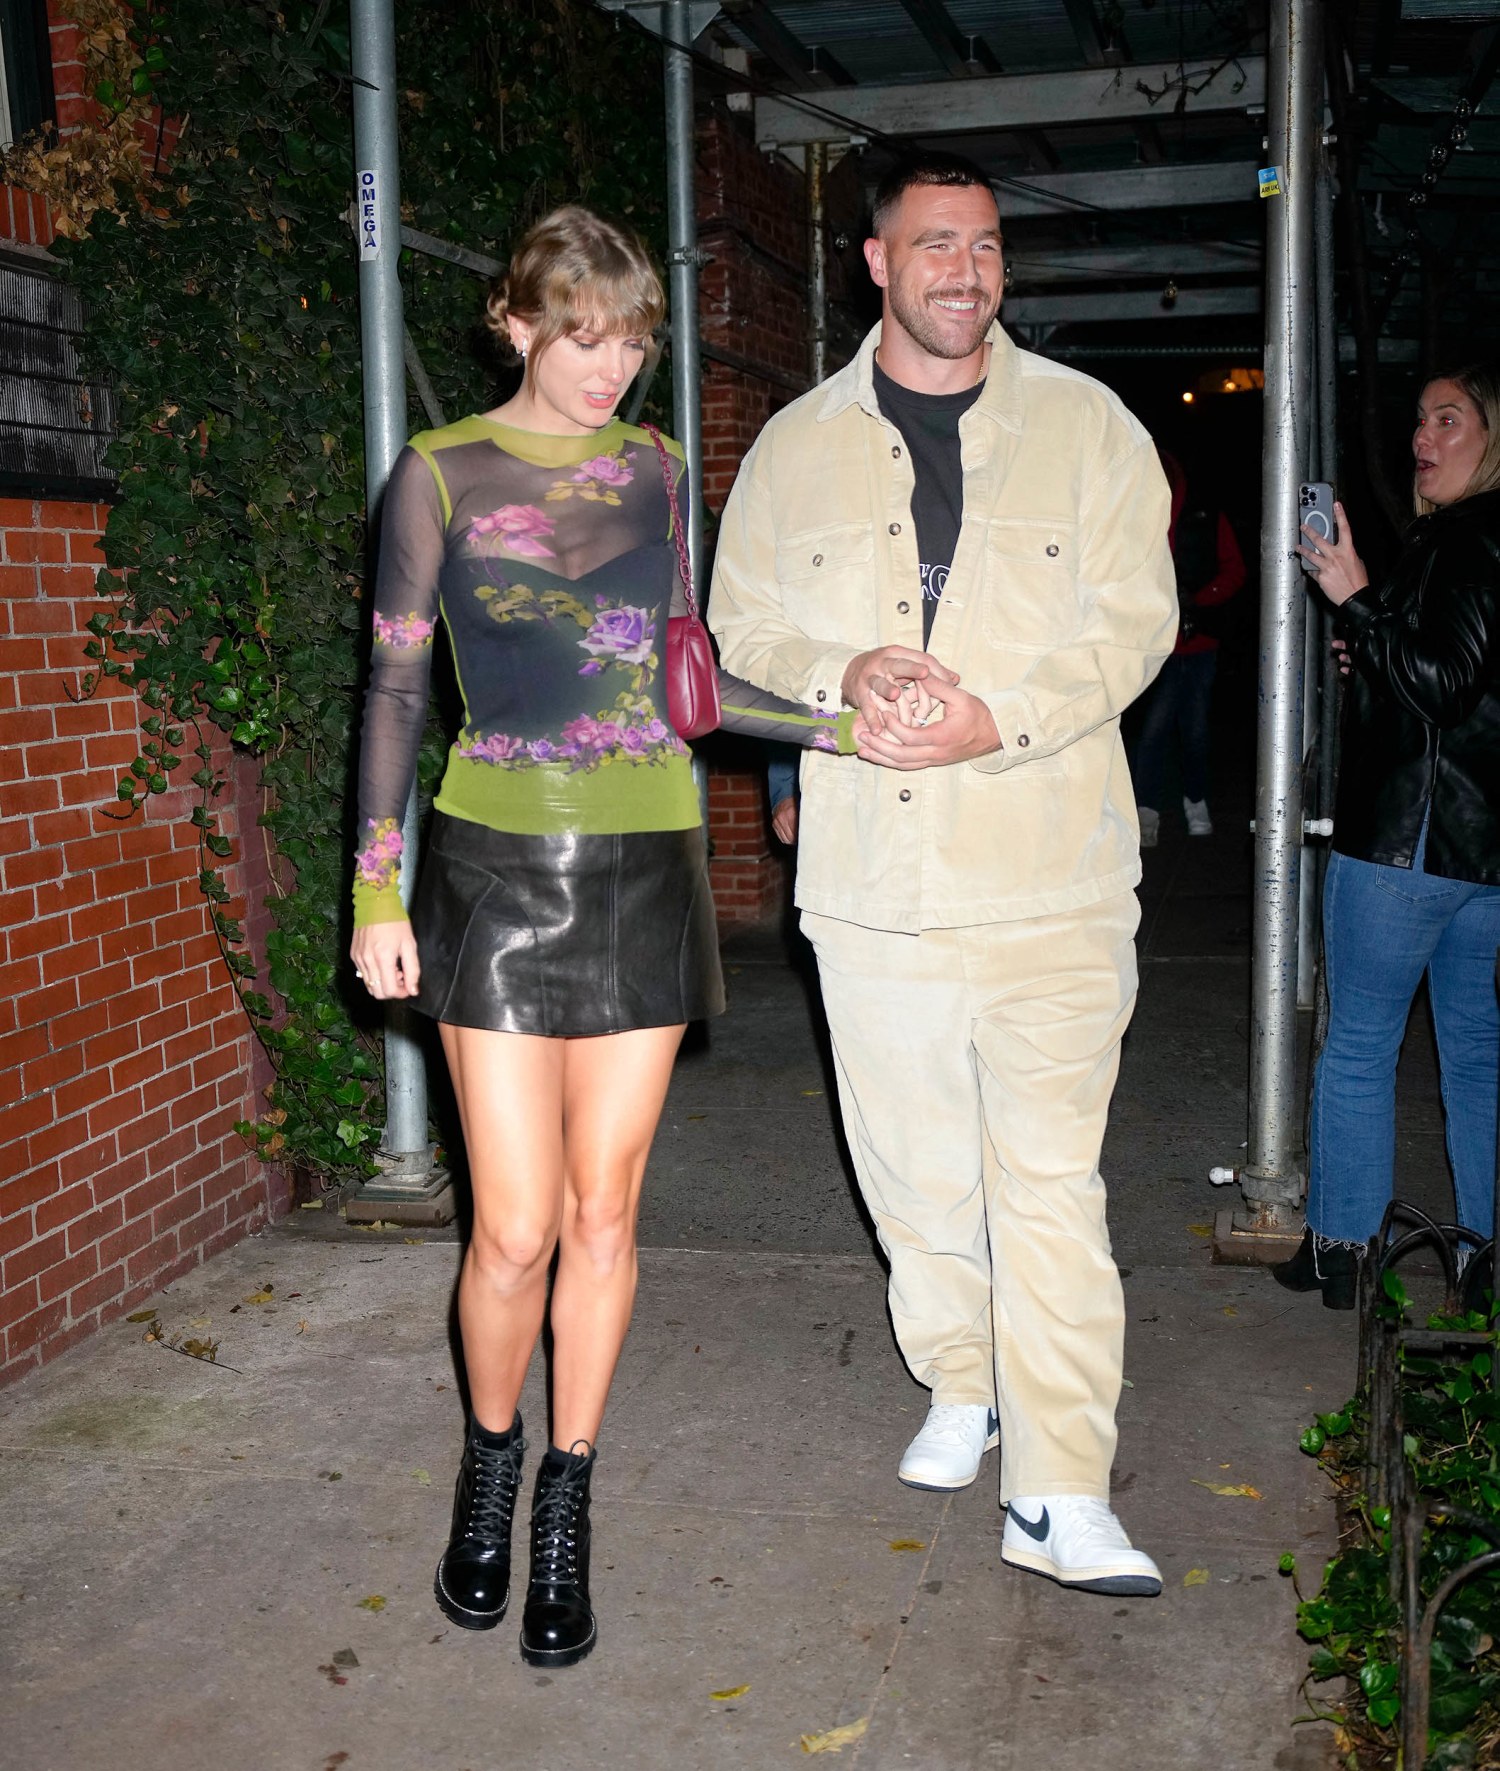 Taylor Swift's family are 'relieved' she has found a 'body guard